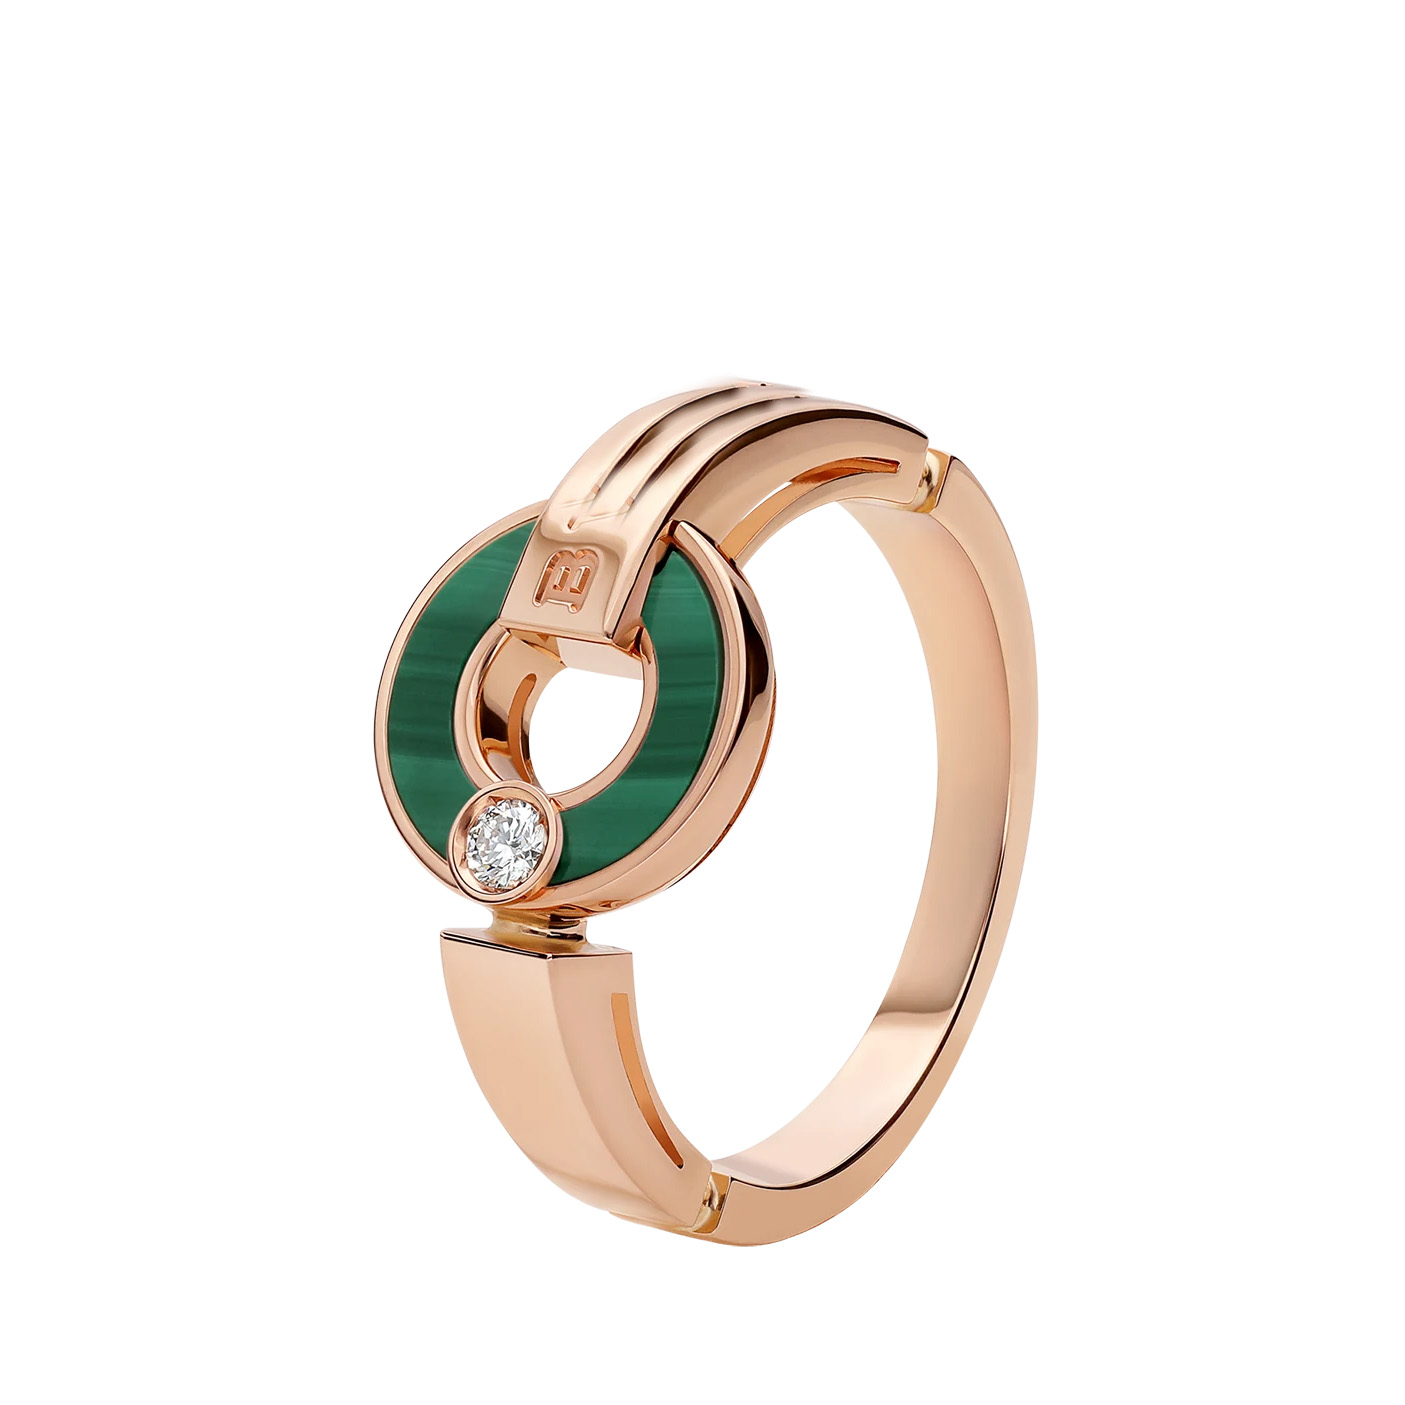 Wholesale OEM/ODM Jewelry Custom design Openwork 18 kt rose gold ring set with malachite elements and a round brilliant-cut diamond OEM Jewelry Manufacturer